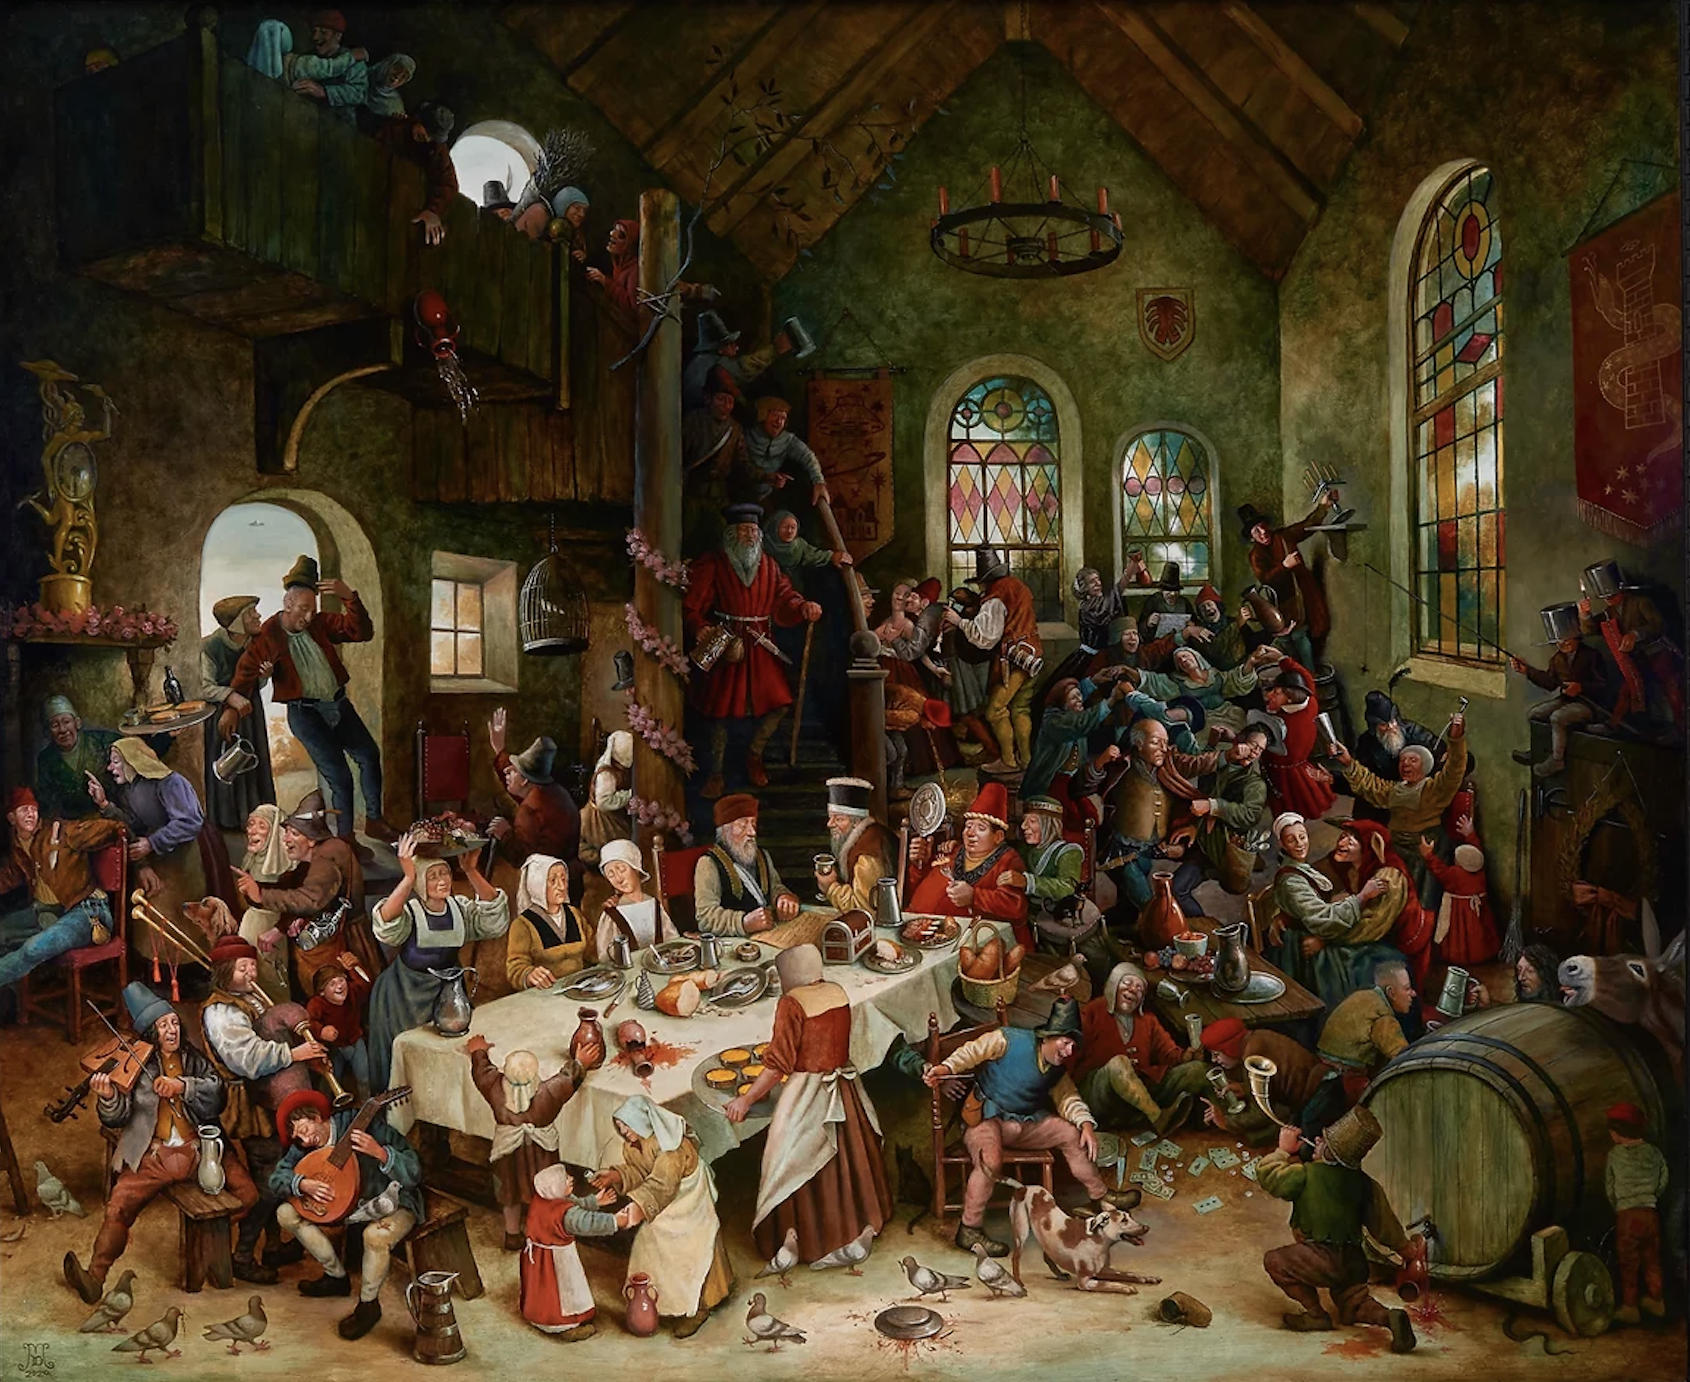 A painting depicting a medieval scene of chaotic revelry.